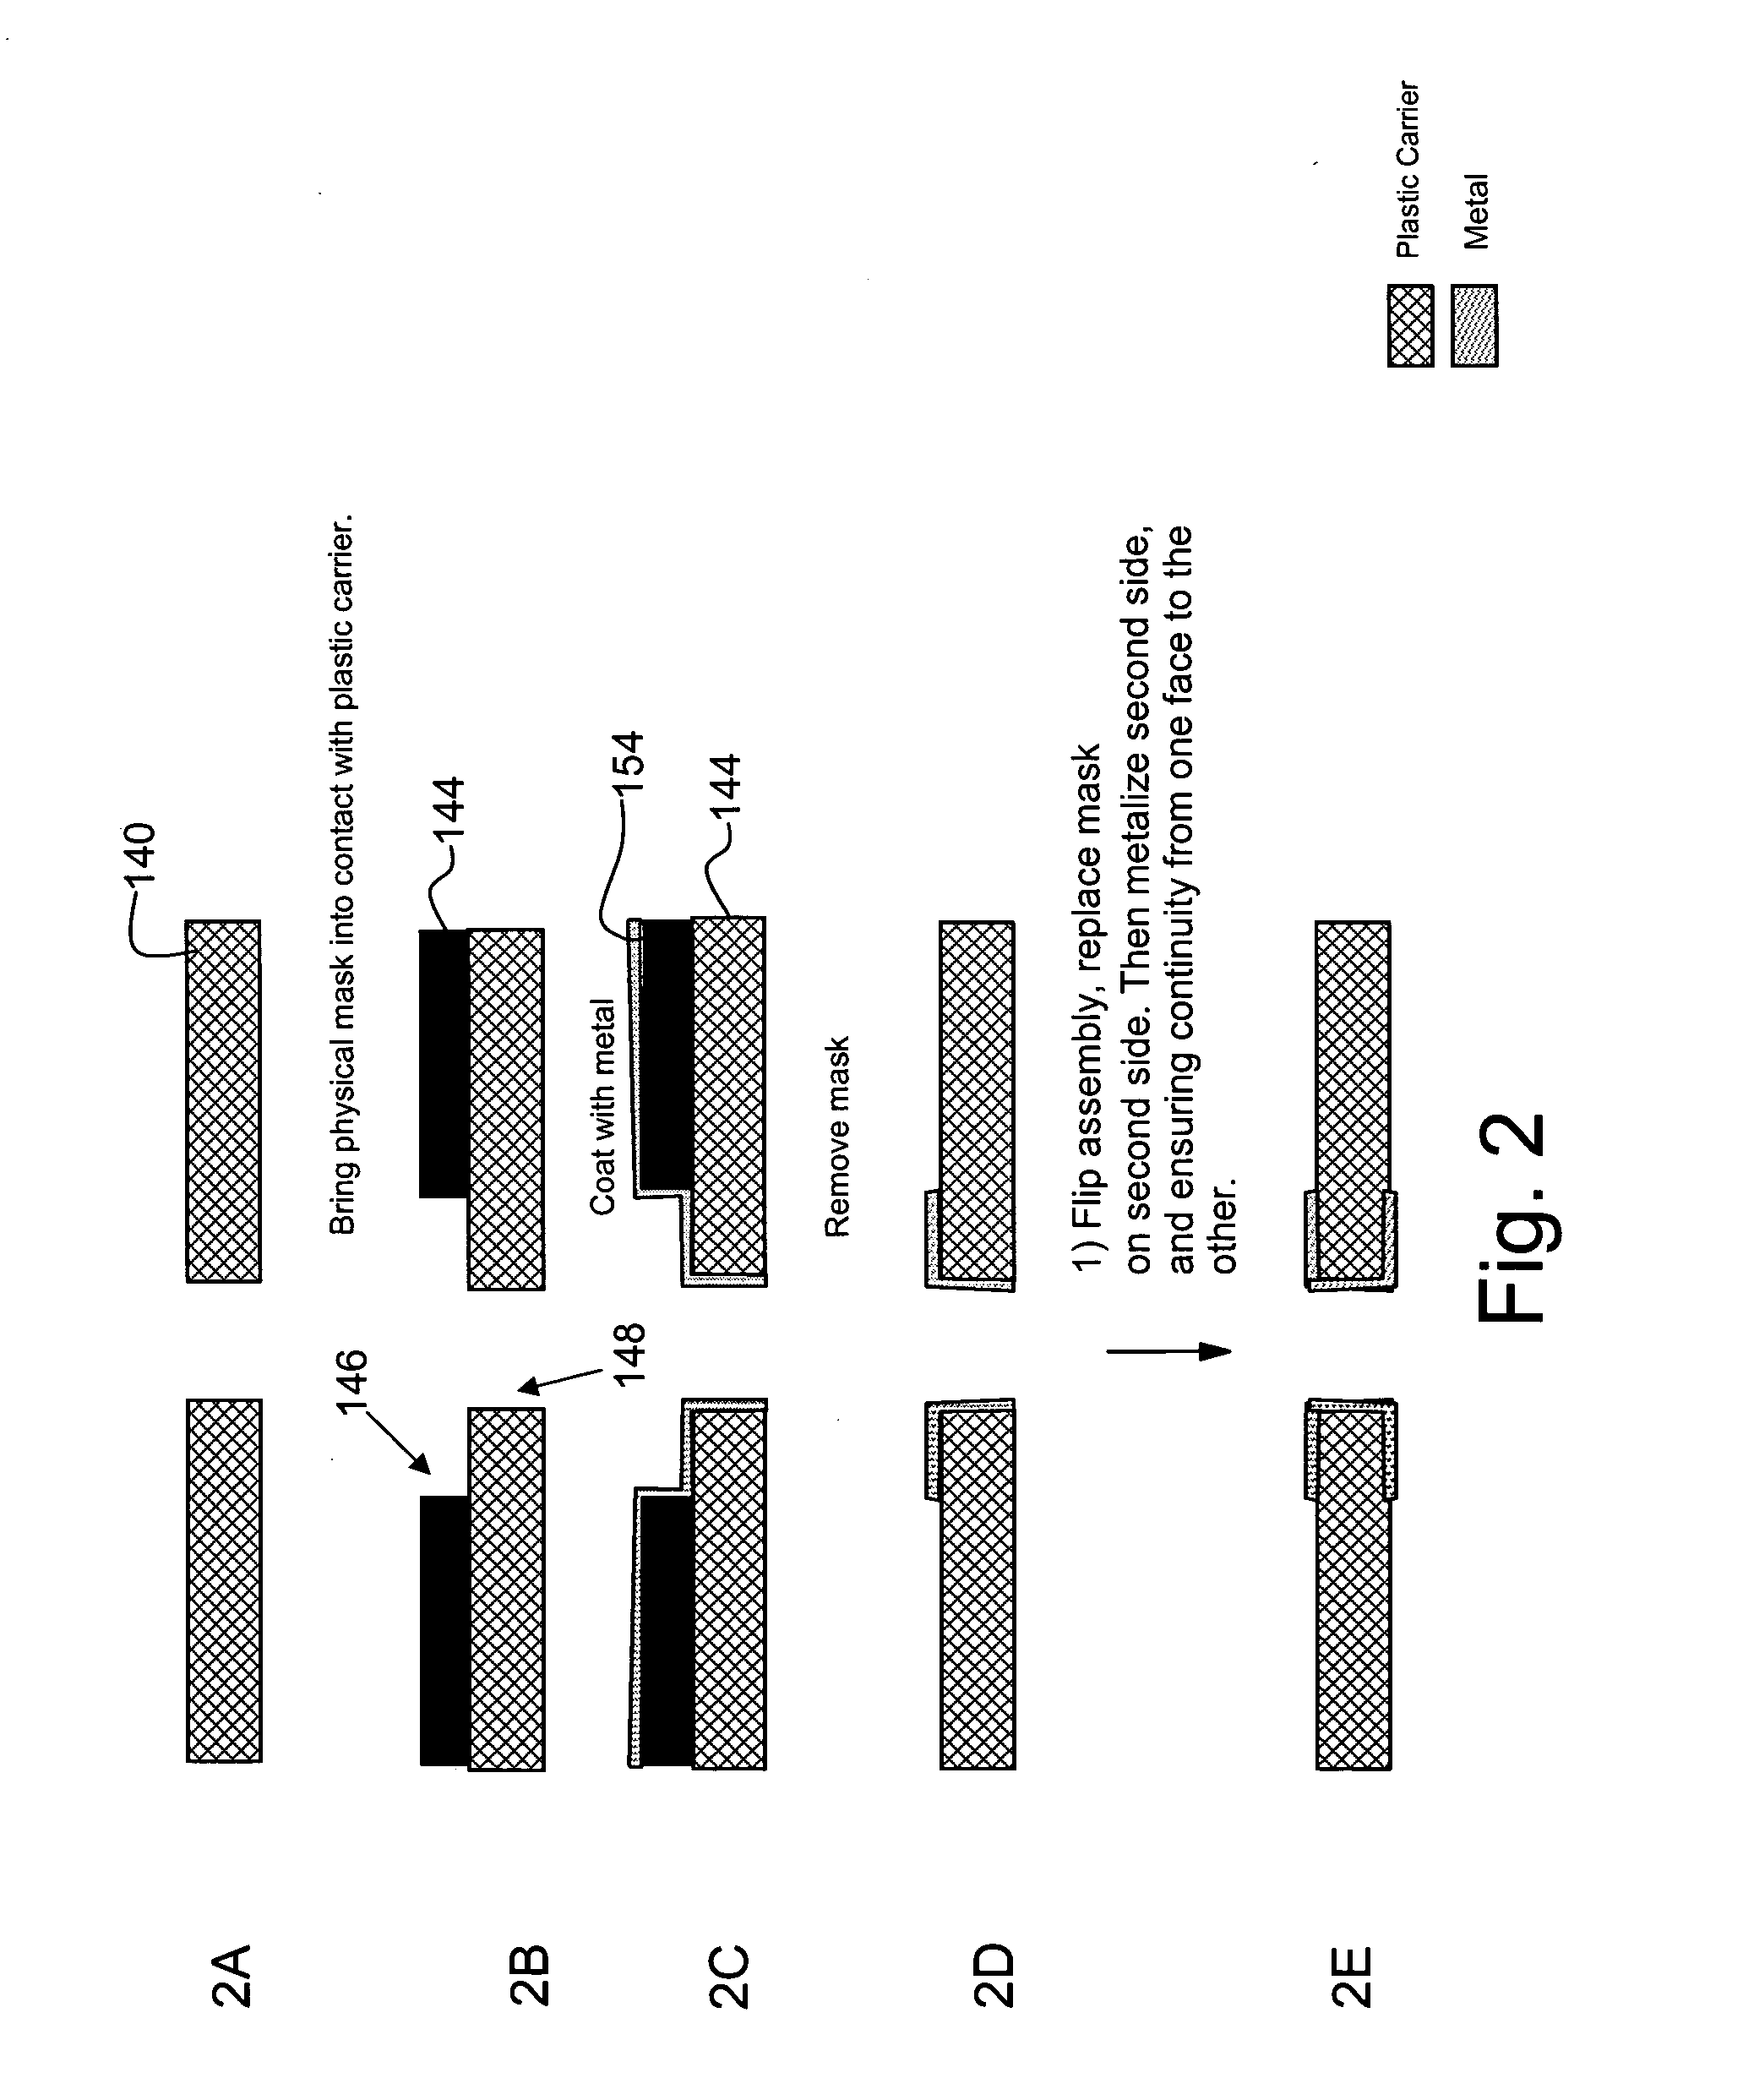 Interposer with electrical contact button and method